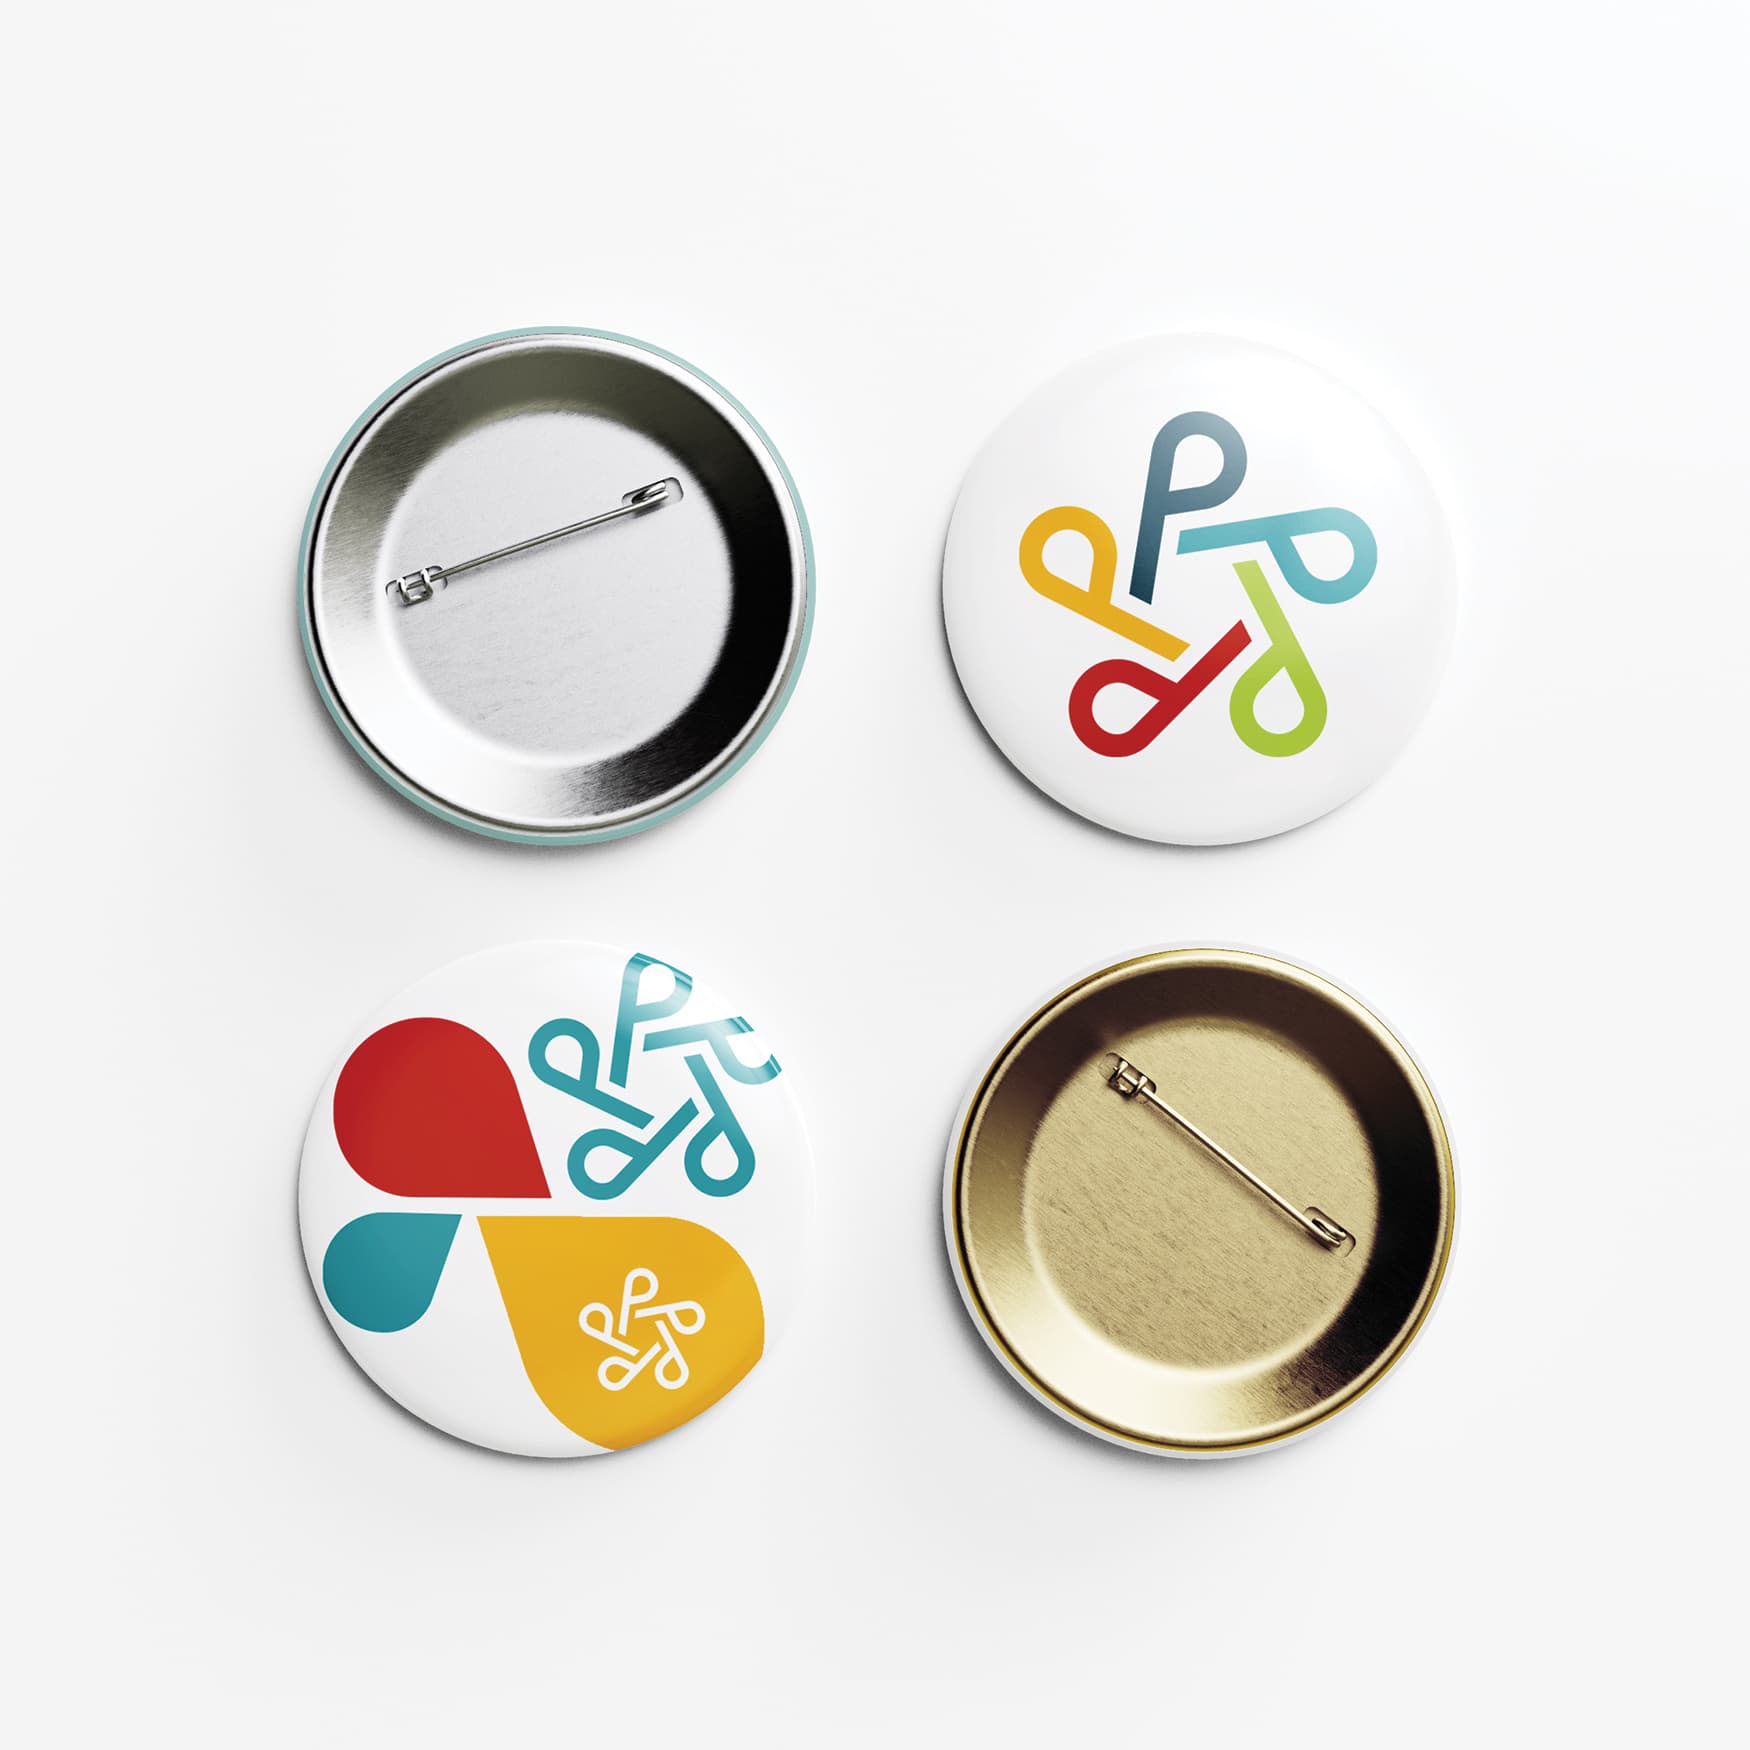 Paragon Star button pins with logo mark and icons. 